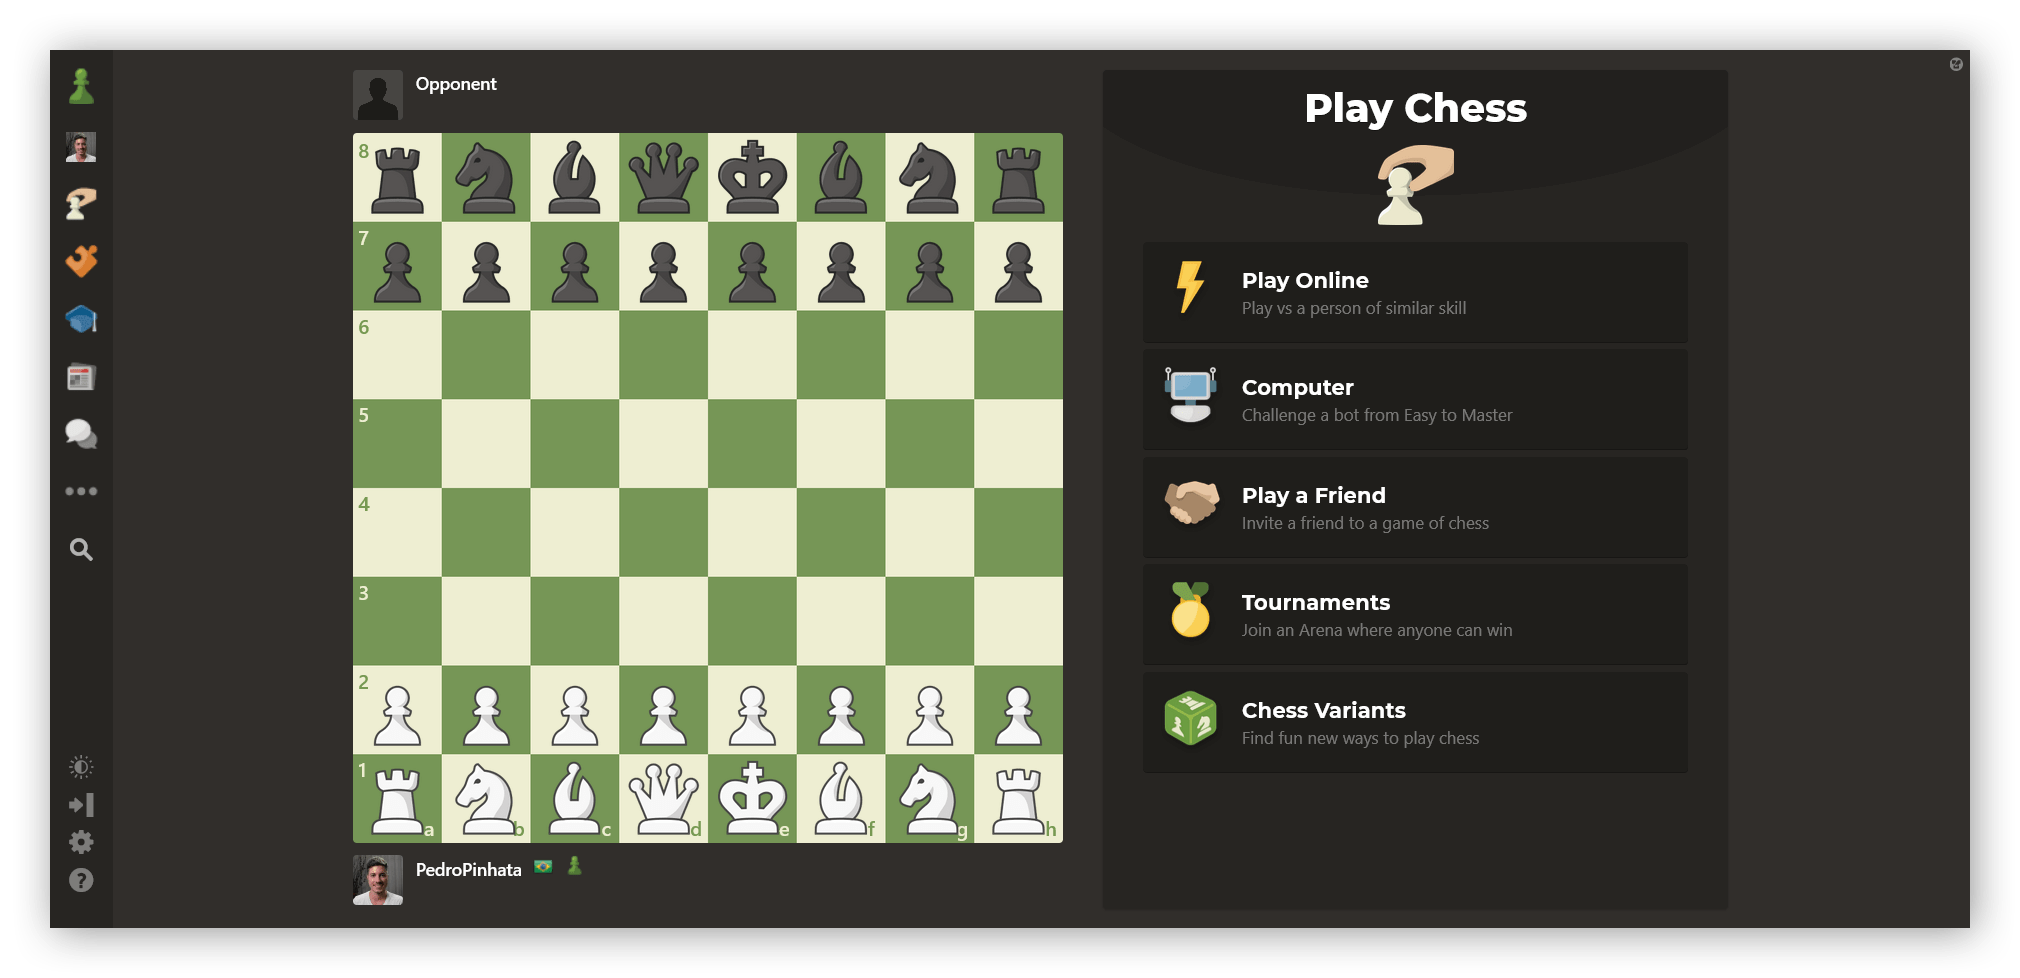 These are the best Chess games you can play on Android phone